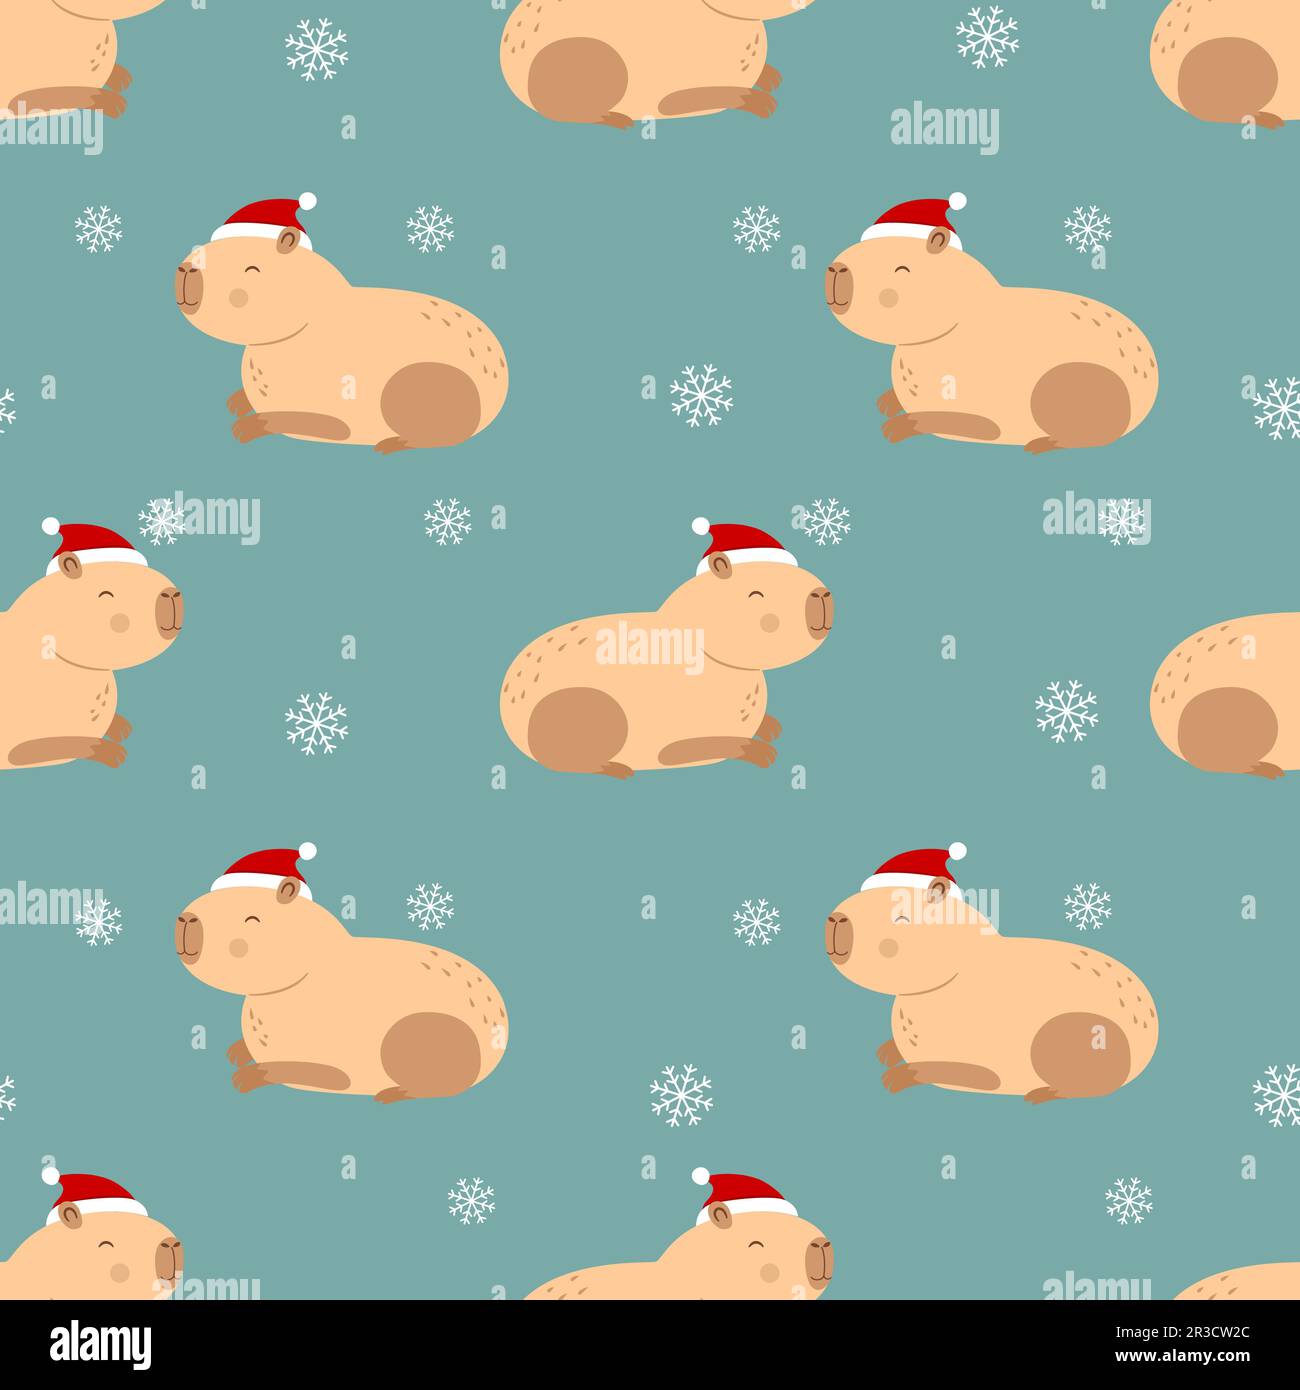 Seamless pattern with capybara in red hat and snowflakes Stock Vector